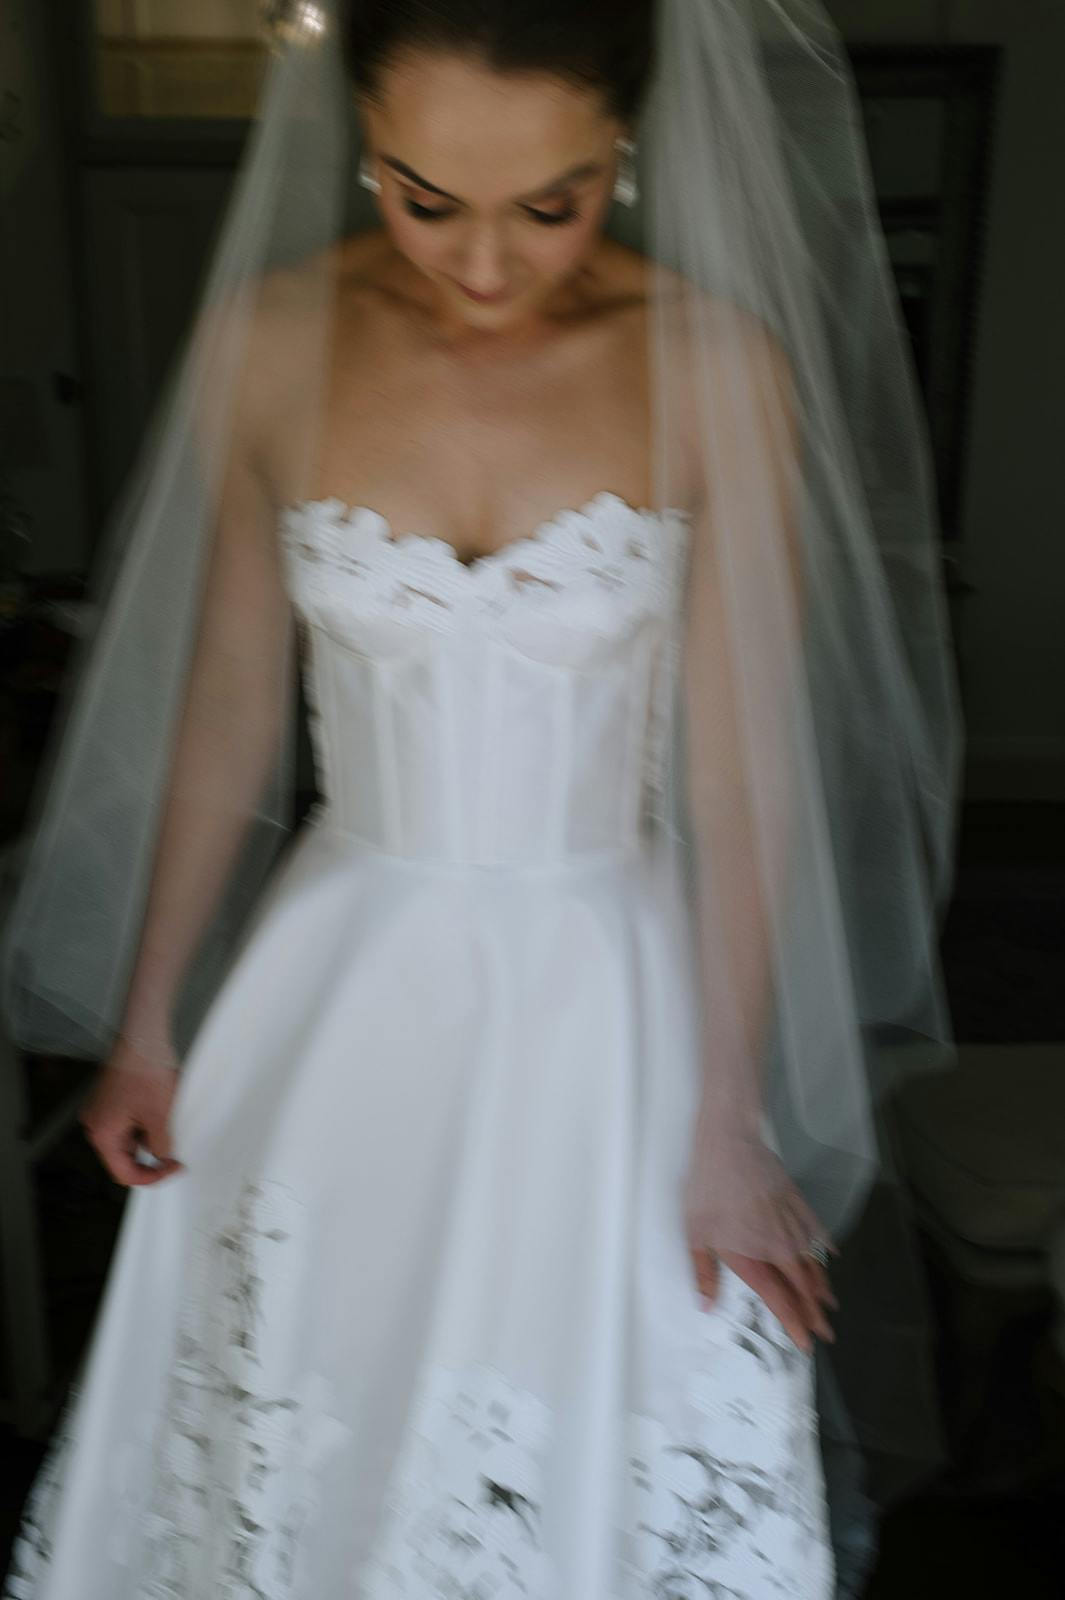 A bride wearing a white strapless wedding gown adorned with lace details stands with a translucent veil draped over her shoulders. The soft lighting and blurred background focus attention on the elegance of her dress and veil.